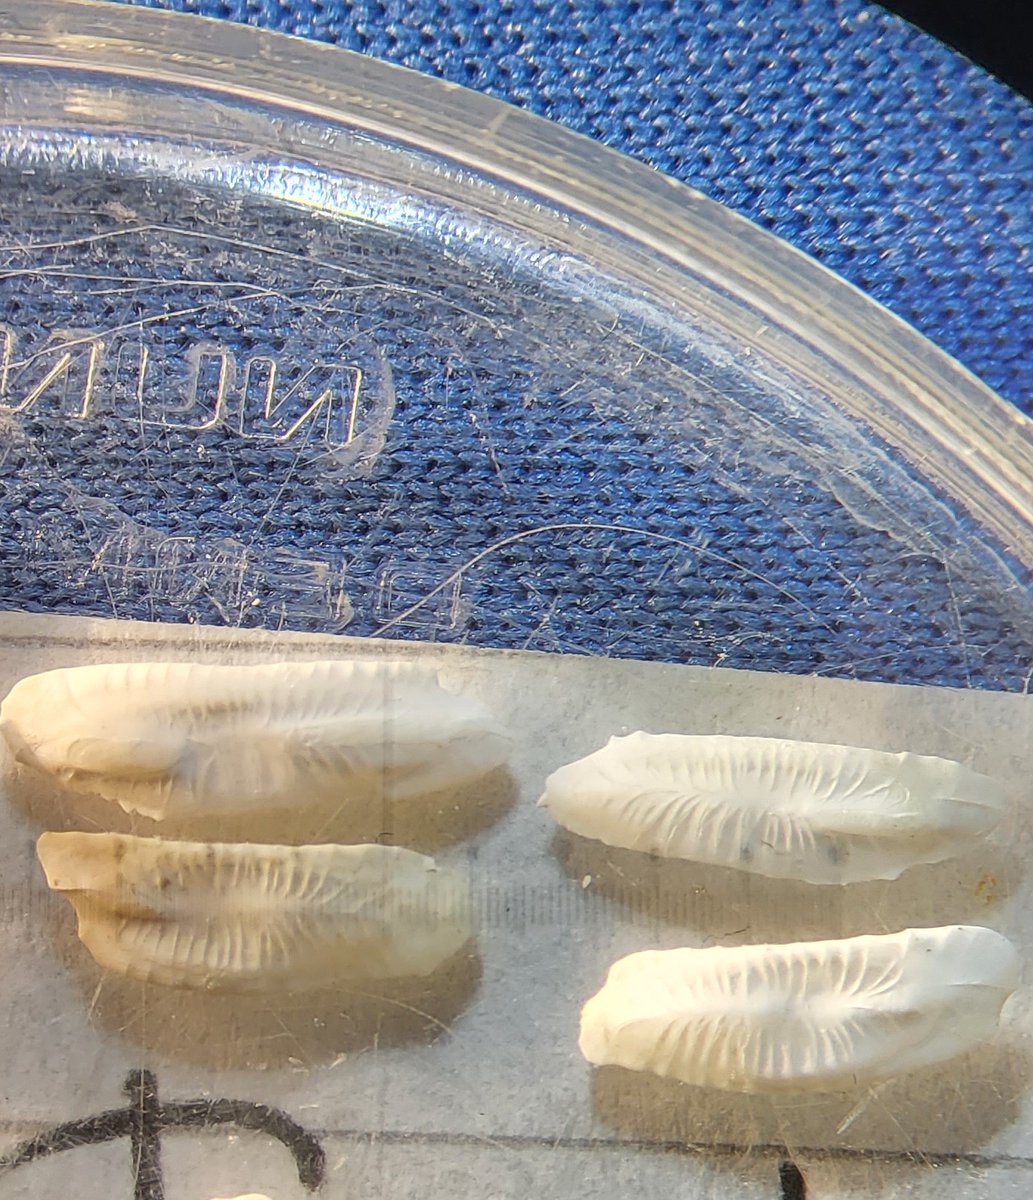 Hey Twitterrati, NEED YOU HELP. We have some degraded otoliths from a fish stomach we can't identify. They are found in a marine fish and are 7-10 mm long. You can see them in the picture. Tell what fish they are from and I will tell you what fish species that ate them😉